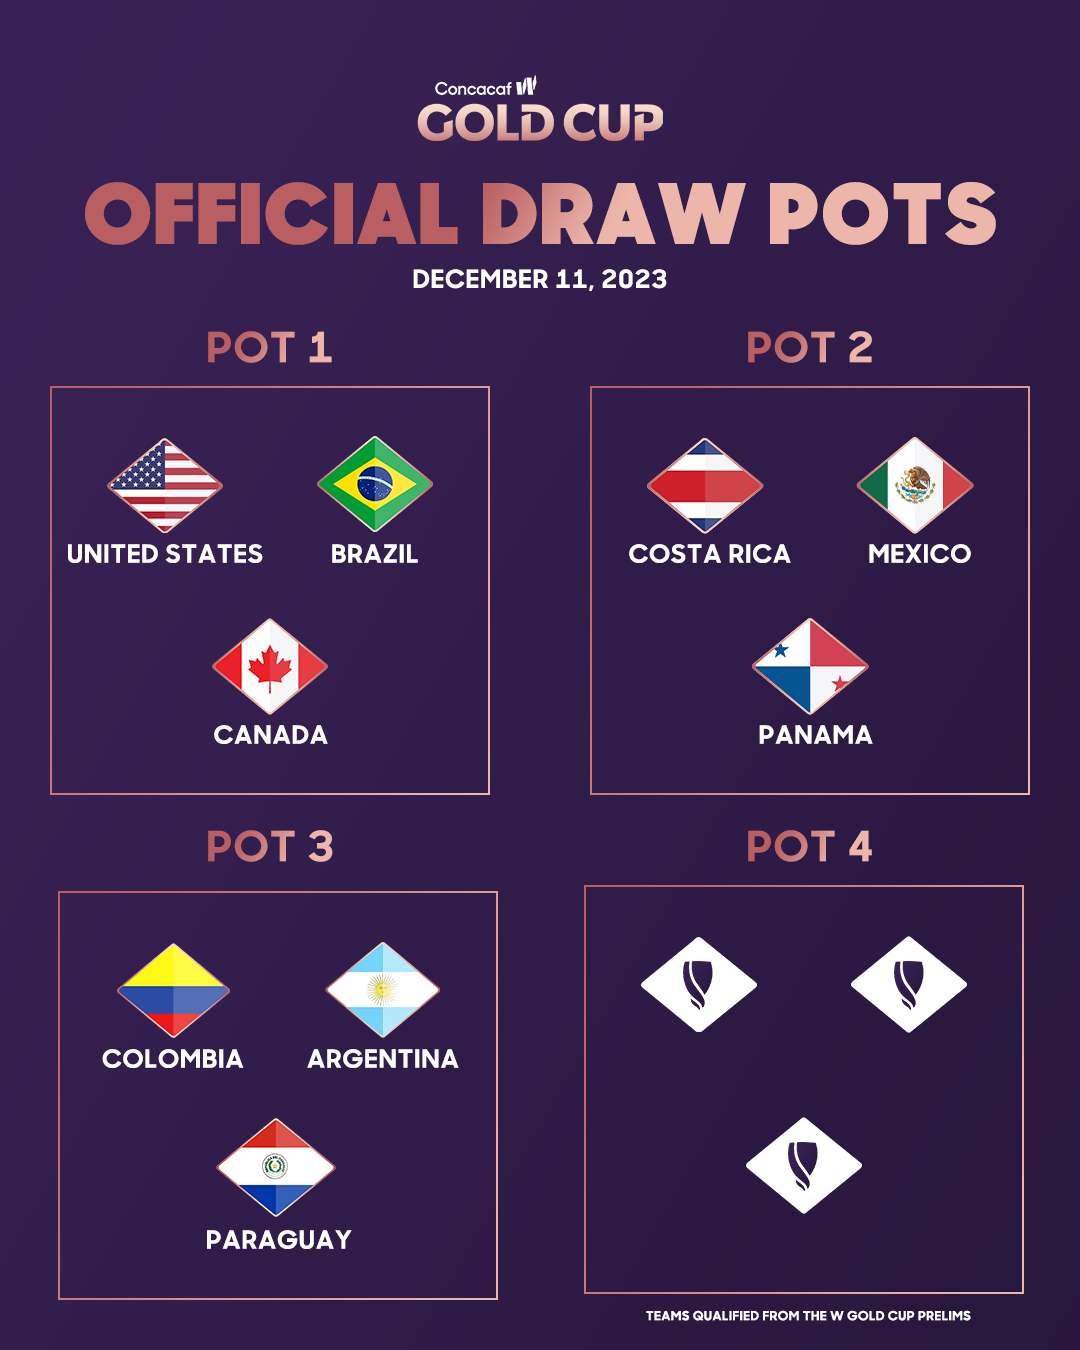 Concacaf W Gold Cup Official Draw Pots. Pot 1: United States, Brazil, Canada; Pot 2: Costa Rica, Mexico, Panama; Pot 3: Colombia, Argentina, Paraguay; Pot 4: Prelims Winners.